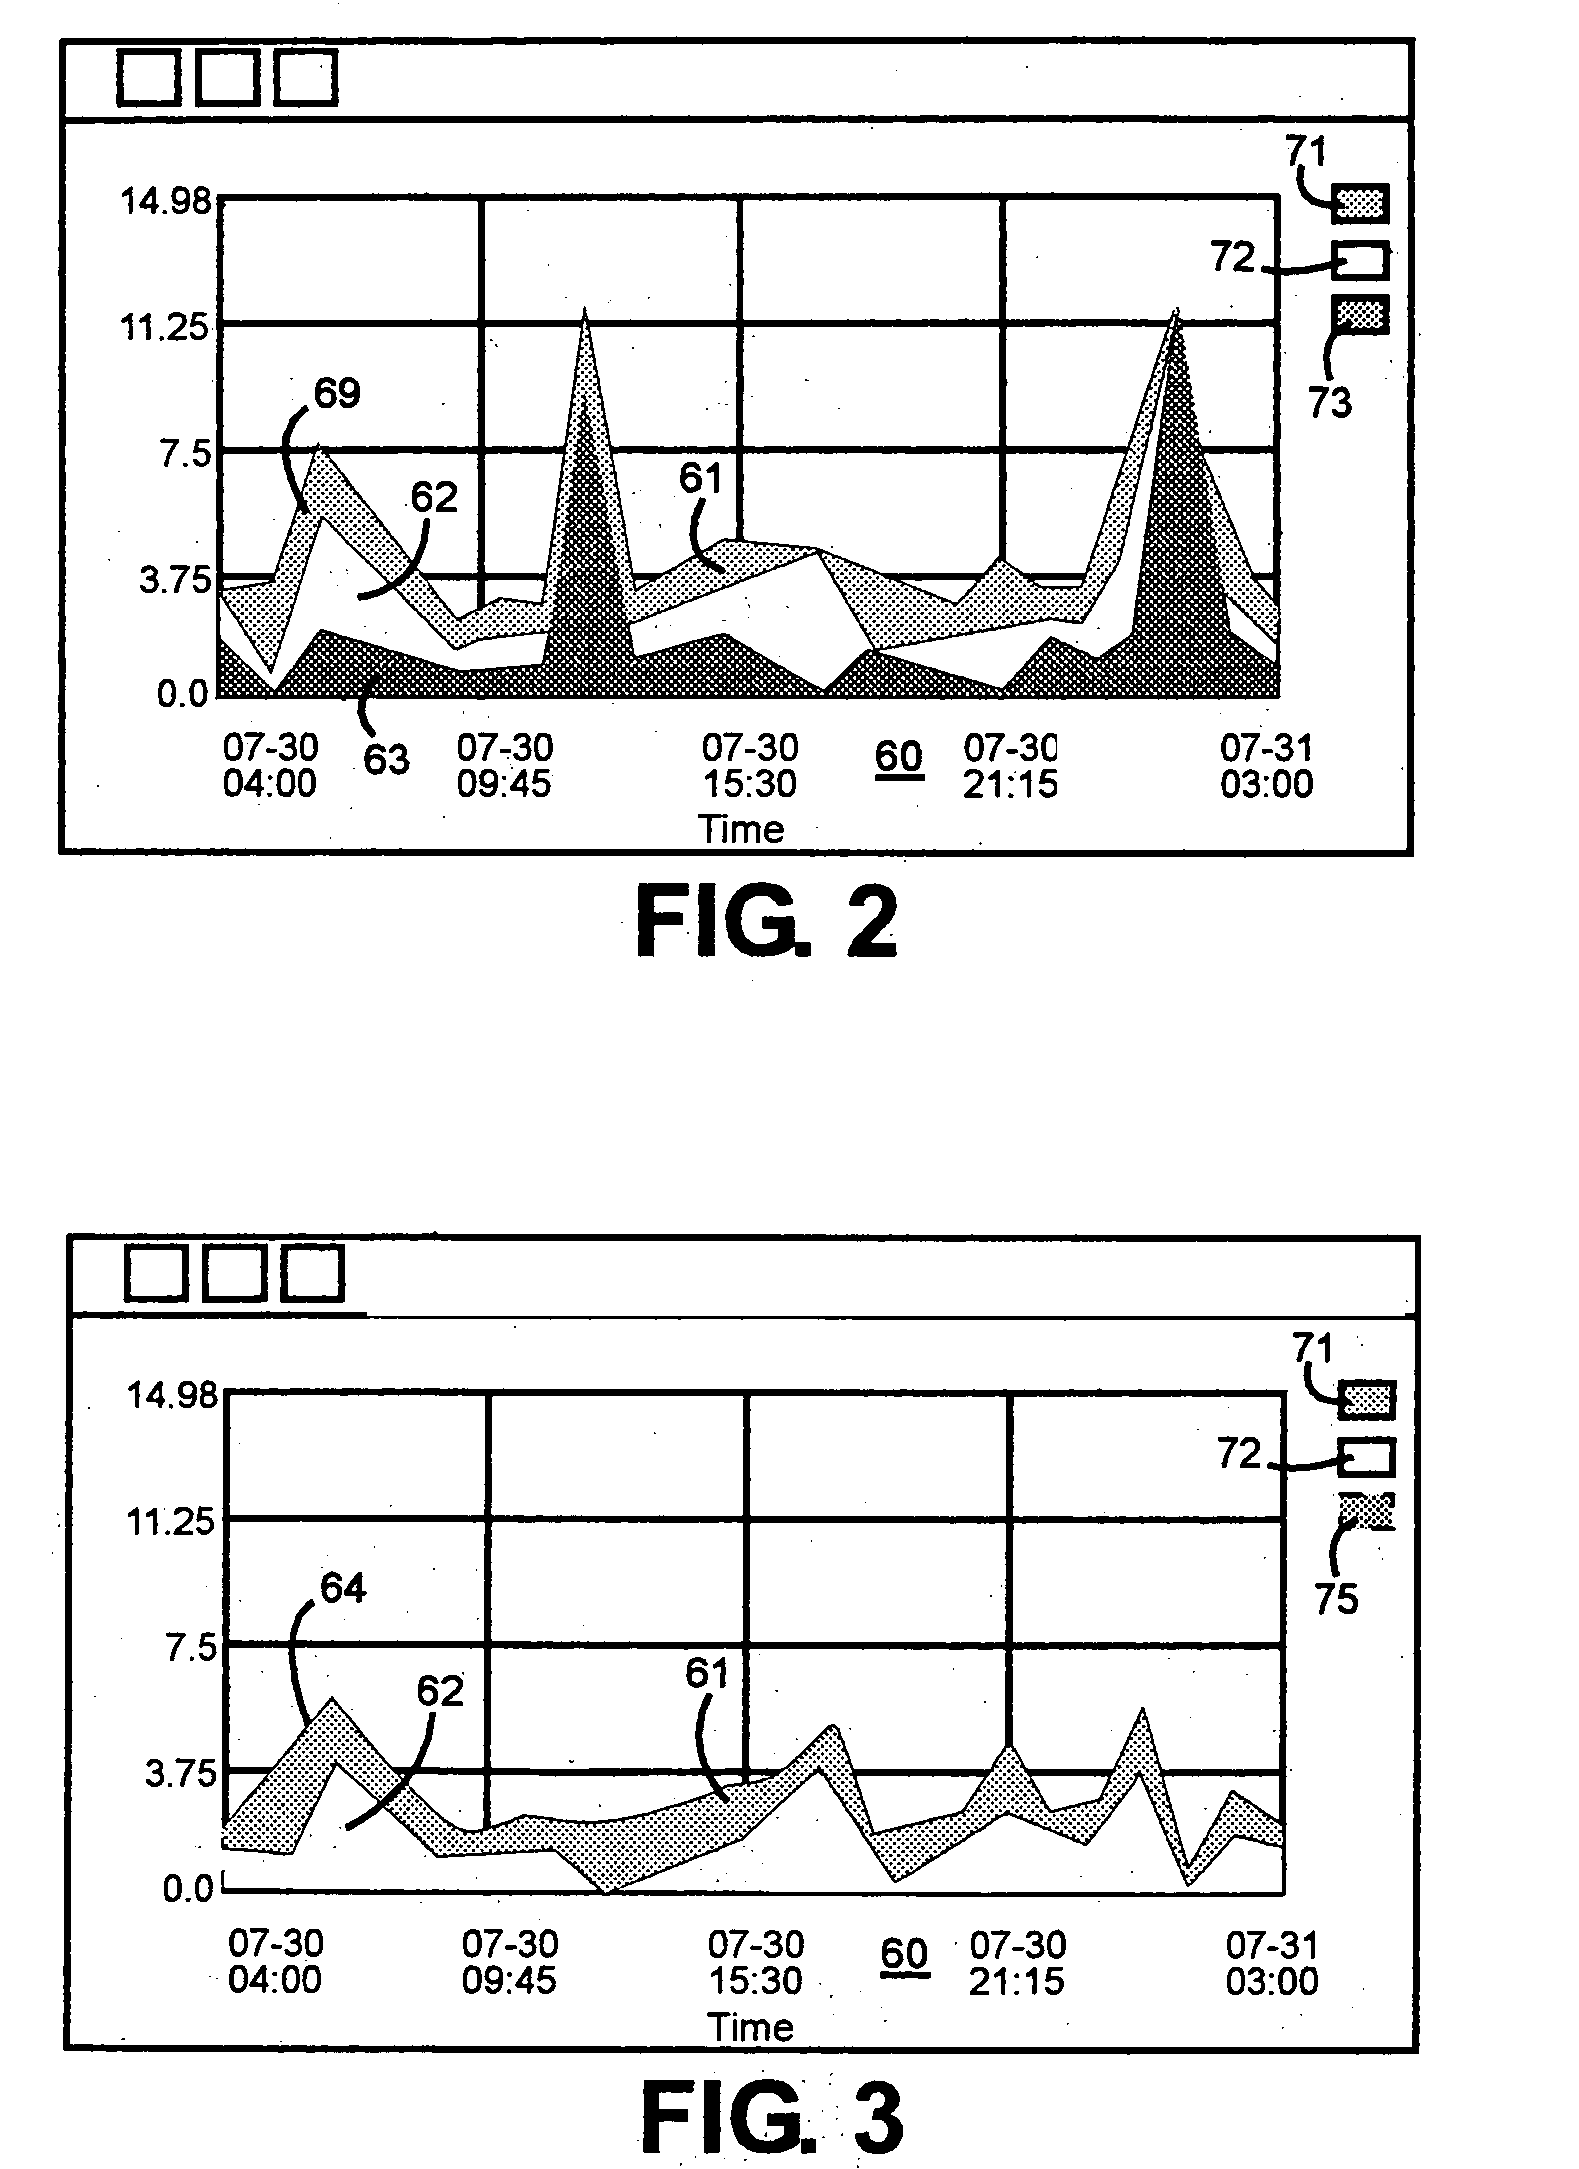 Computer display system for dynamically modifying stacked area line graphs to change the order or presence of a set of stacked areas in the graph respectively representative of the proportions contributed to a total by each of a set of time dependent variables